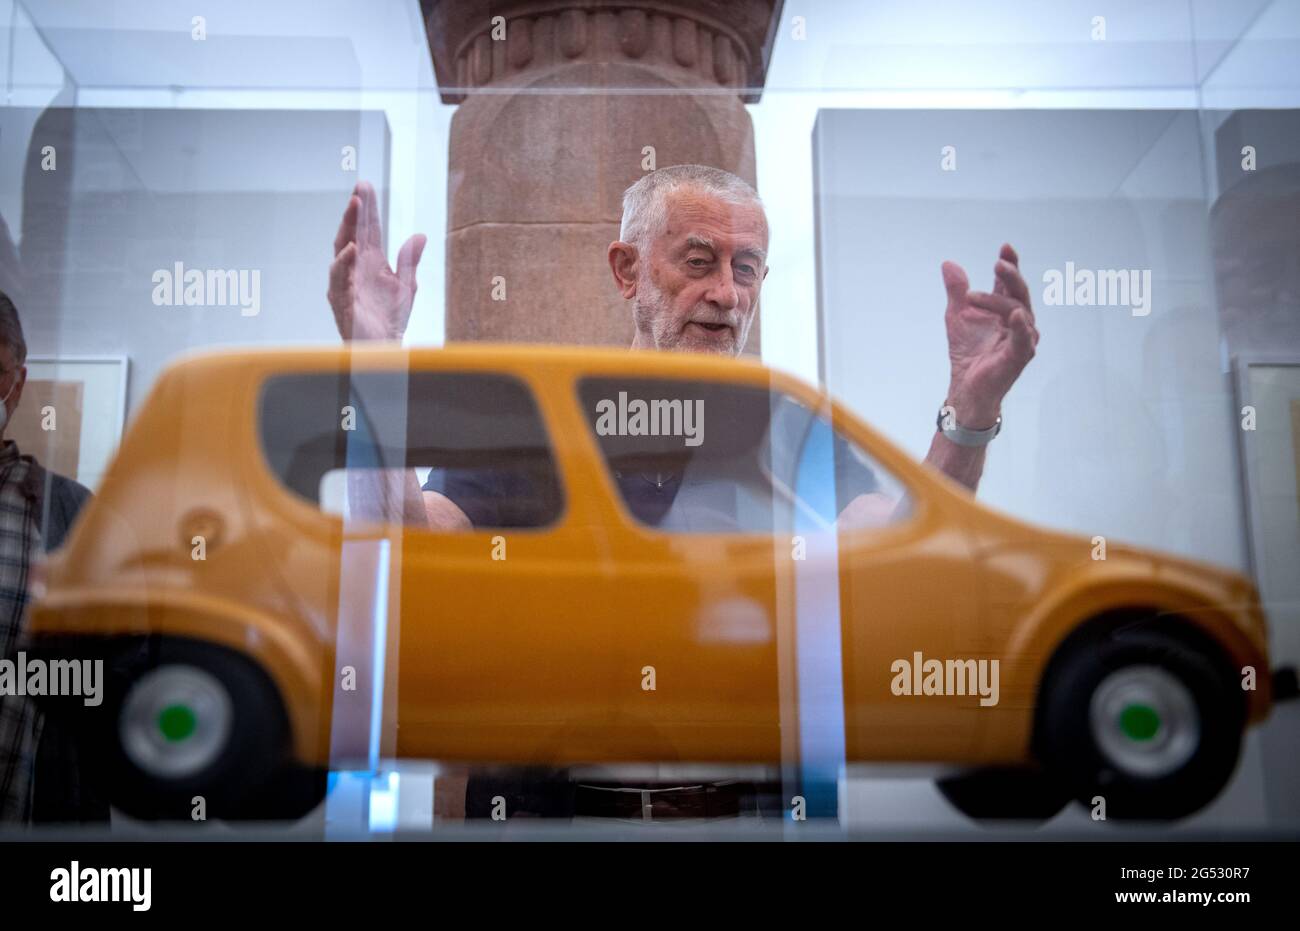 Chemnitz, Germany. 25th June, 2021. In the Chemnitz Art Collections, the designer Karl Clauss Dietel stands behind a display case with a vehicle model from 1971/72, which he designed together with the designer Lutz Rudolph. Entitled 'Simson, Diamant, Erika - Form Design by Karl Clauss Dietel', the show provides an insight into the designer's work. Aware of the importance of a cohesive oeuvre, Dietel archived his life's work for decades and in 2019 handed it over in its entirety to the care of the Städtische Kunstsammlungen. Credit: Hendrik Schmidt/dpa-Zentralbild/dpa/Alamy Live News Stock Photo